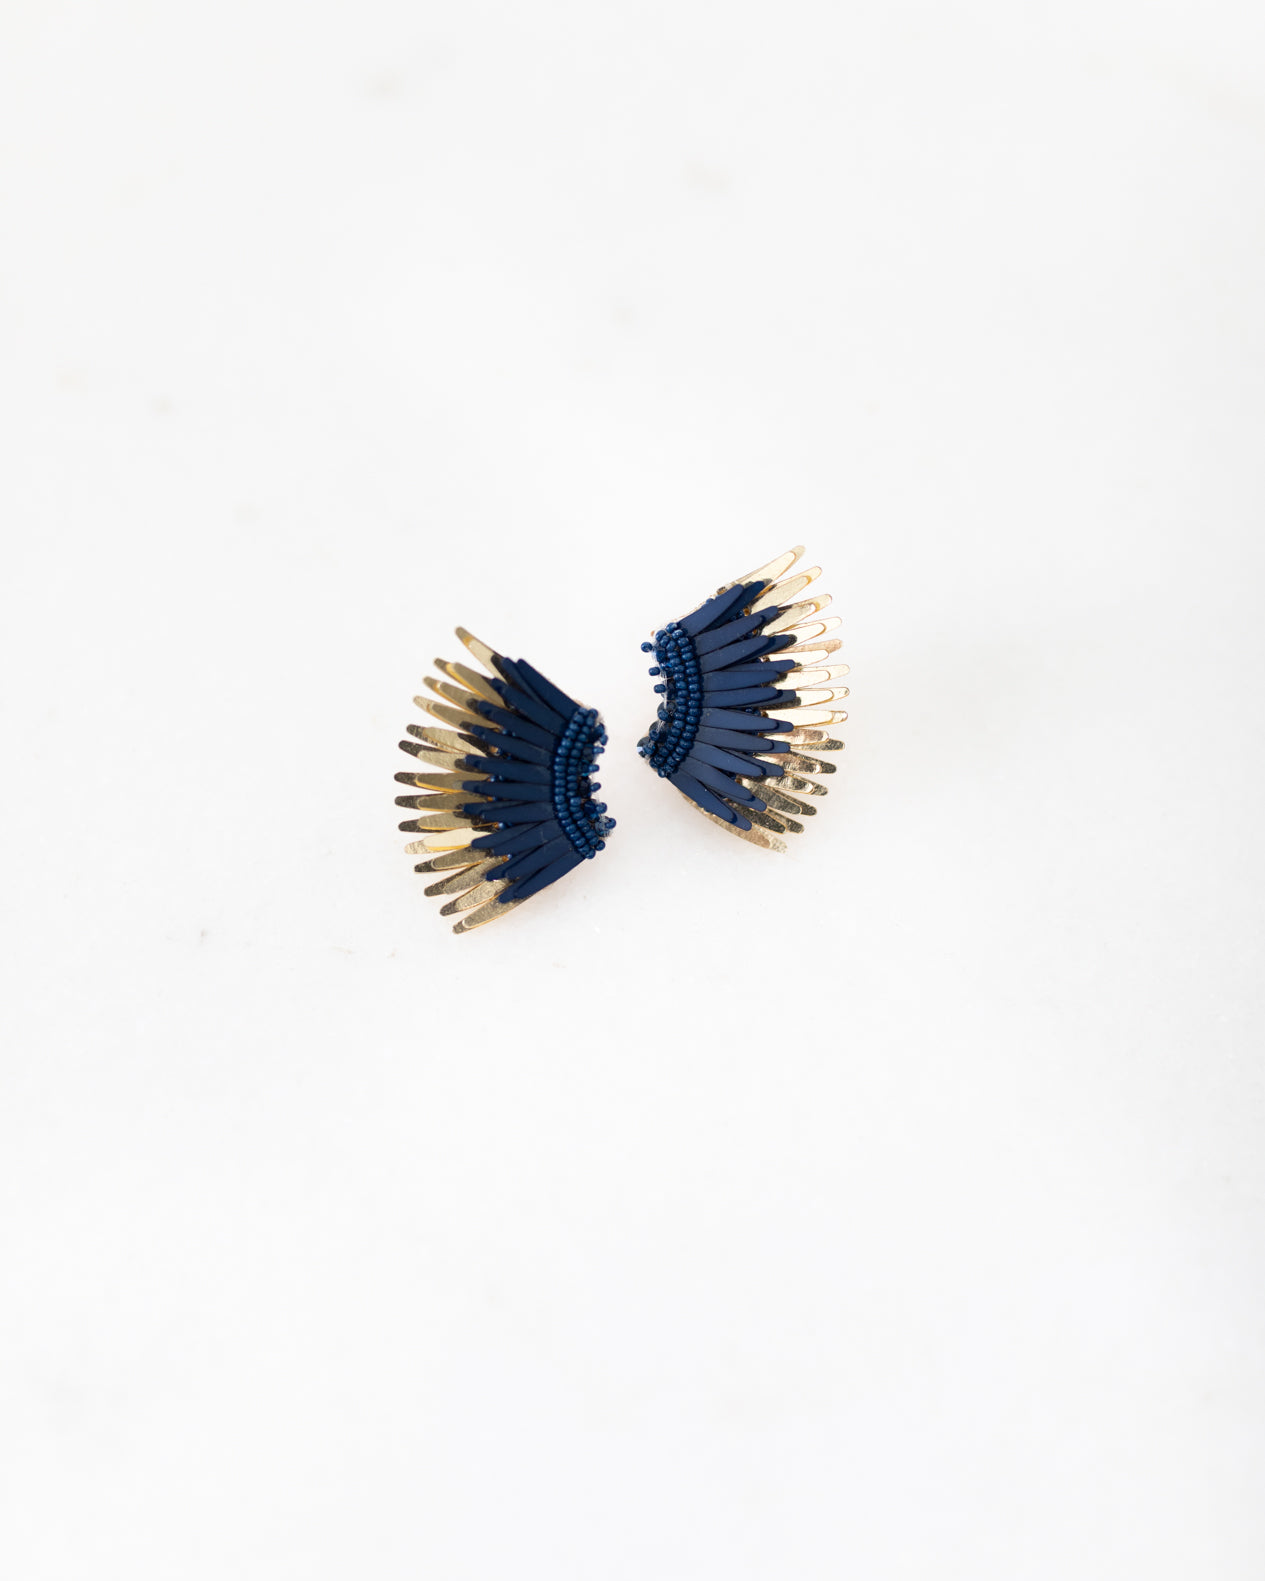 MINI MADELINE EARRINGS NAVY GOLD by MIGNONNE GIVIGAN